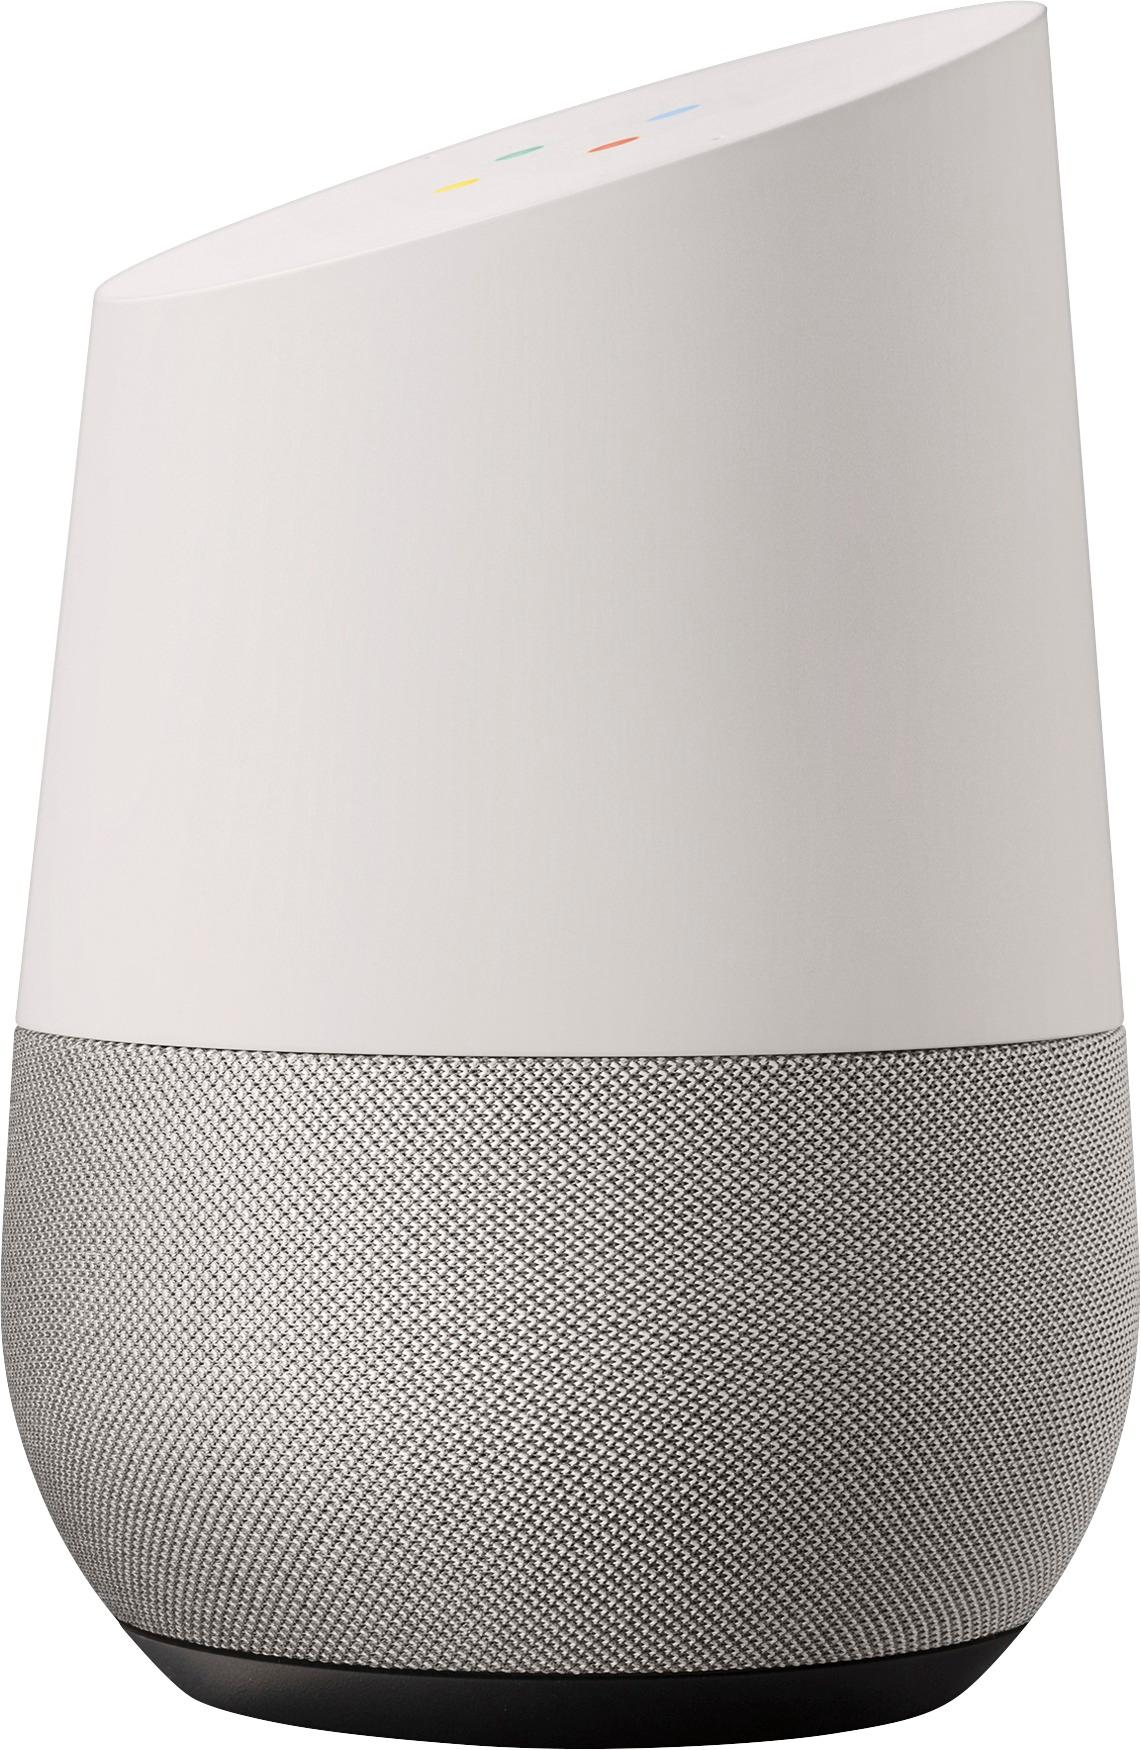 Google Home brings Google's smarts to your living room